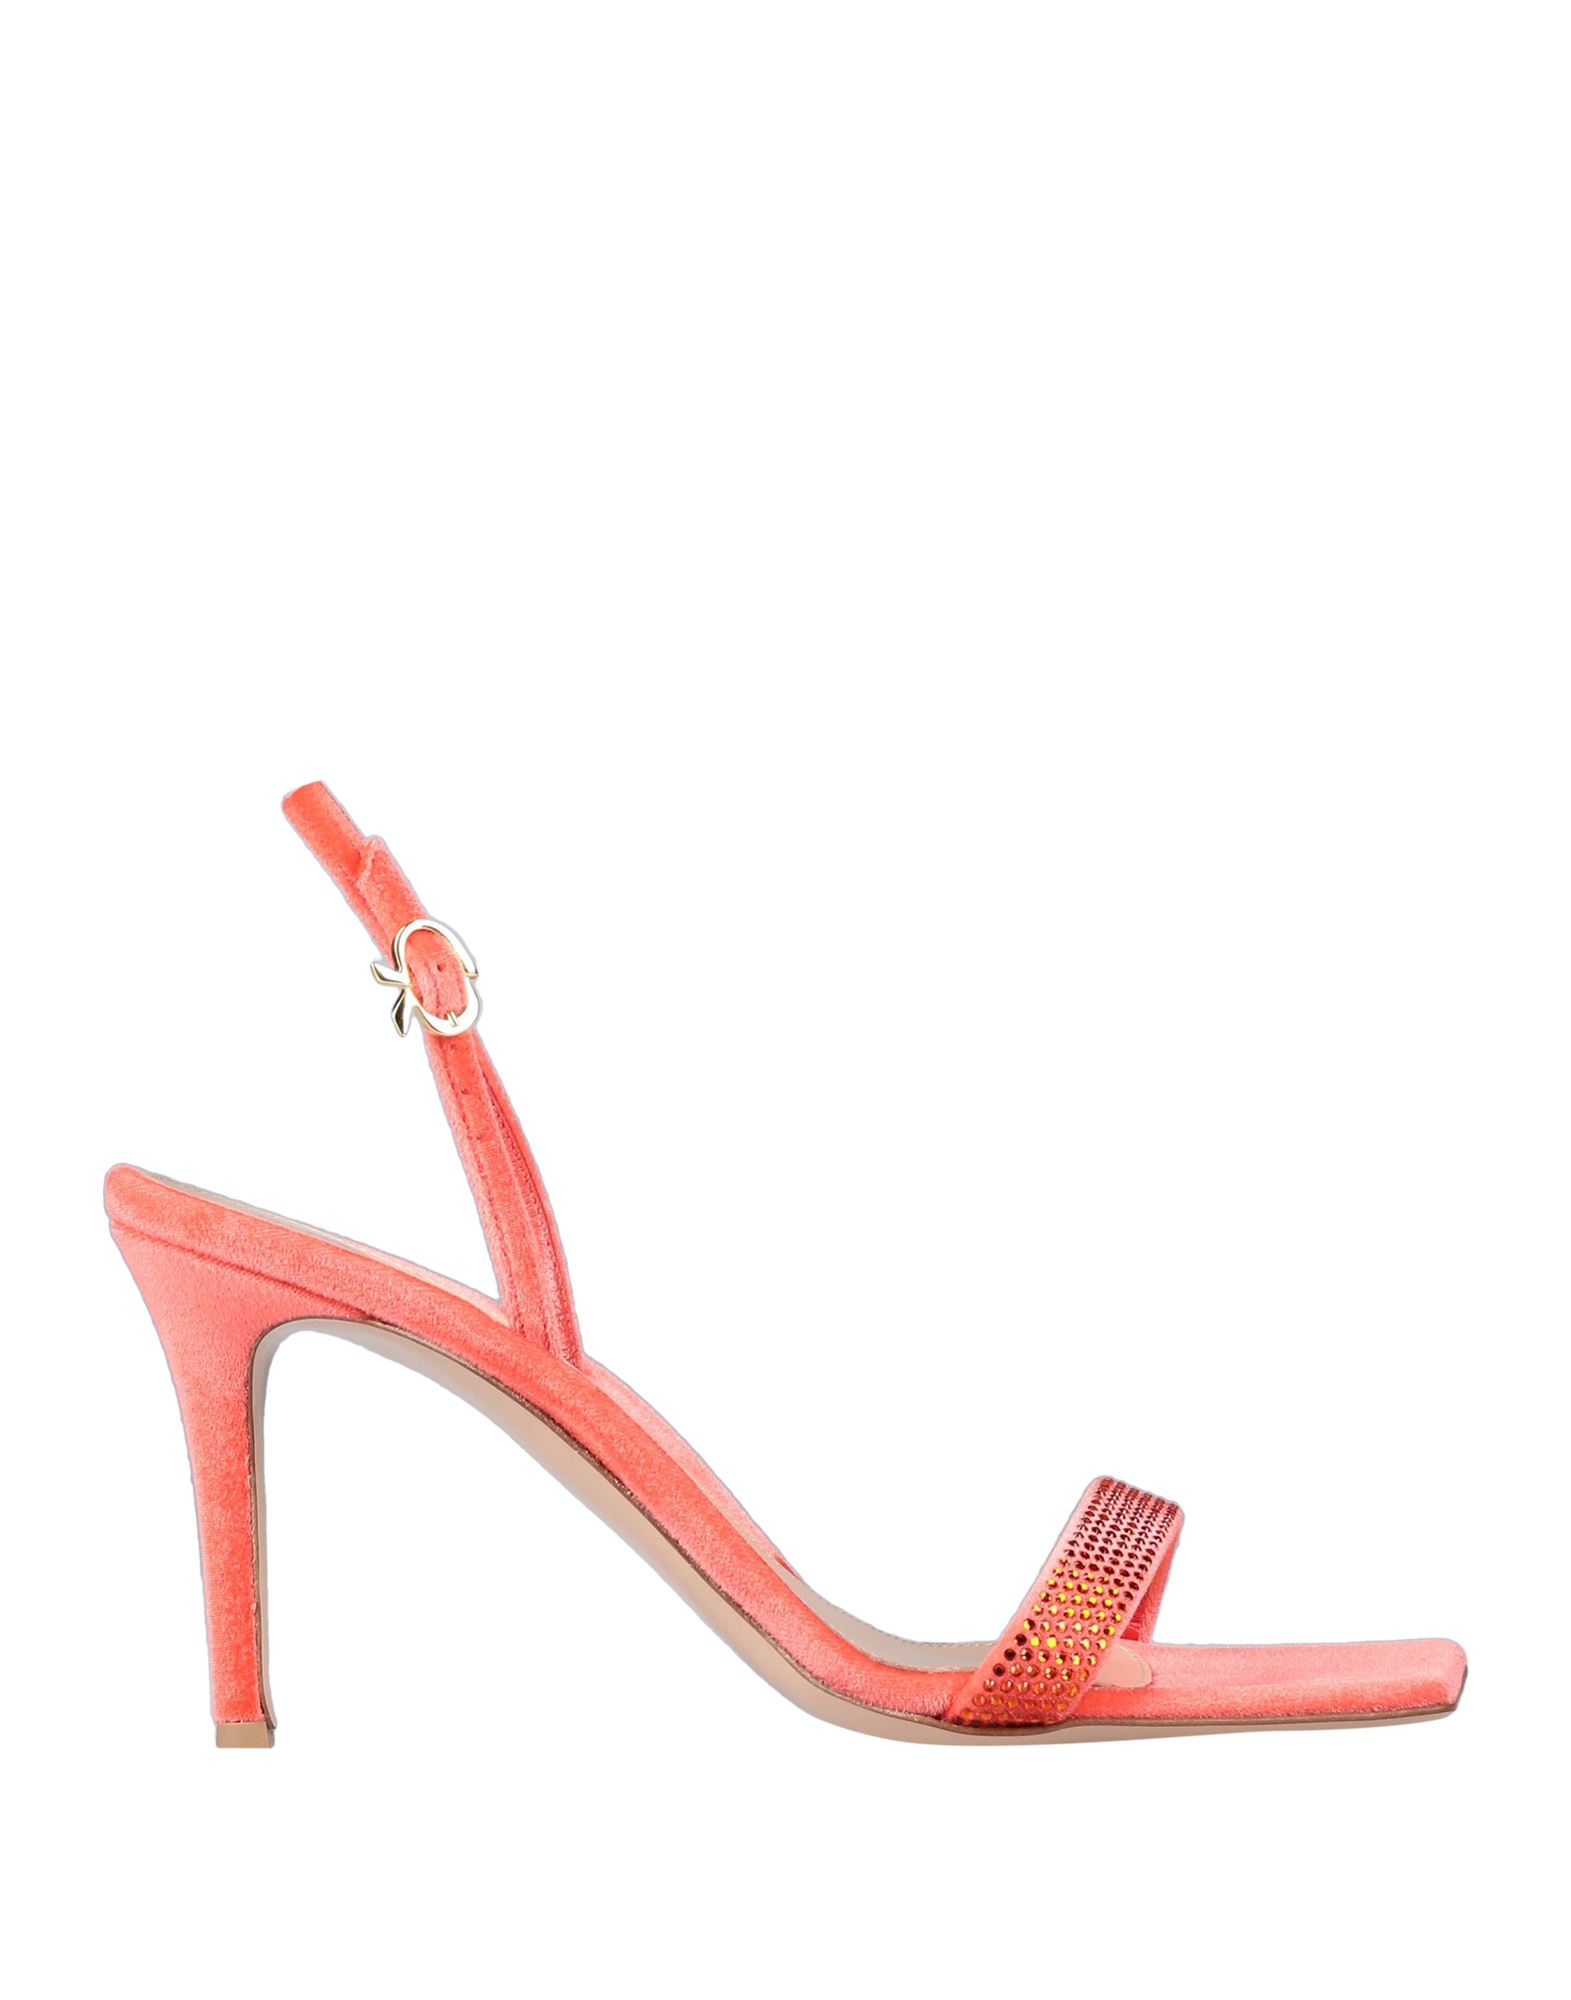 Gianvito Rossi Sandals In Red